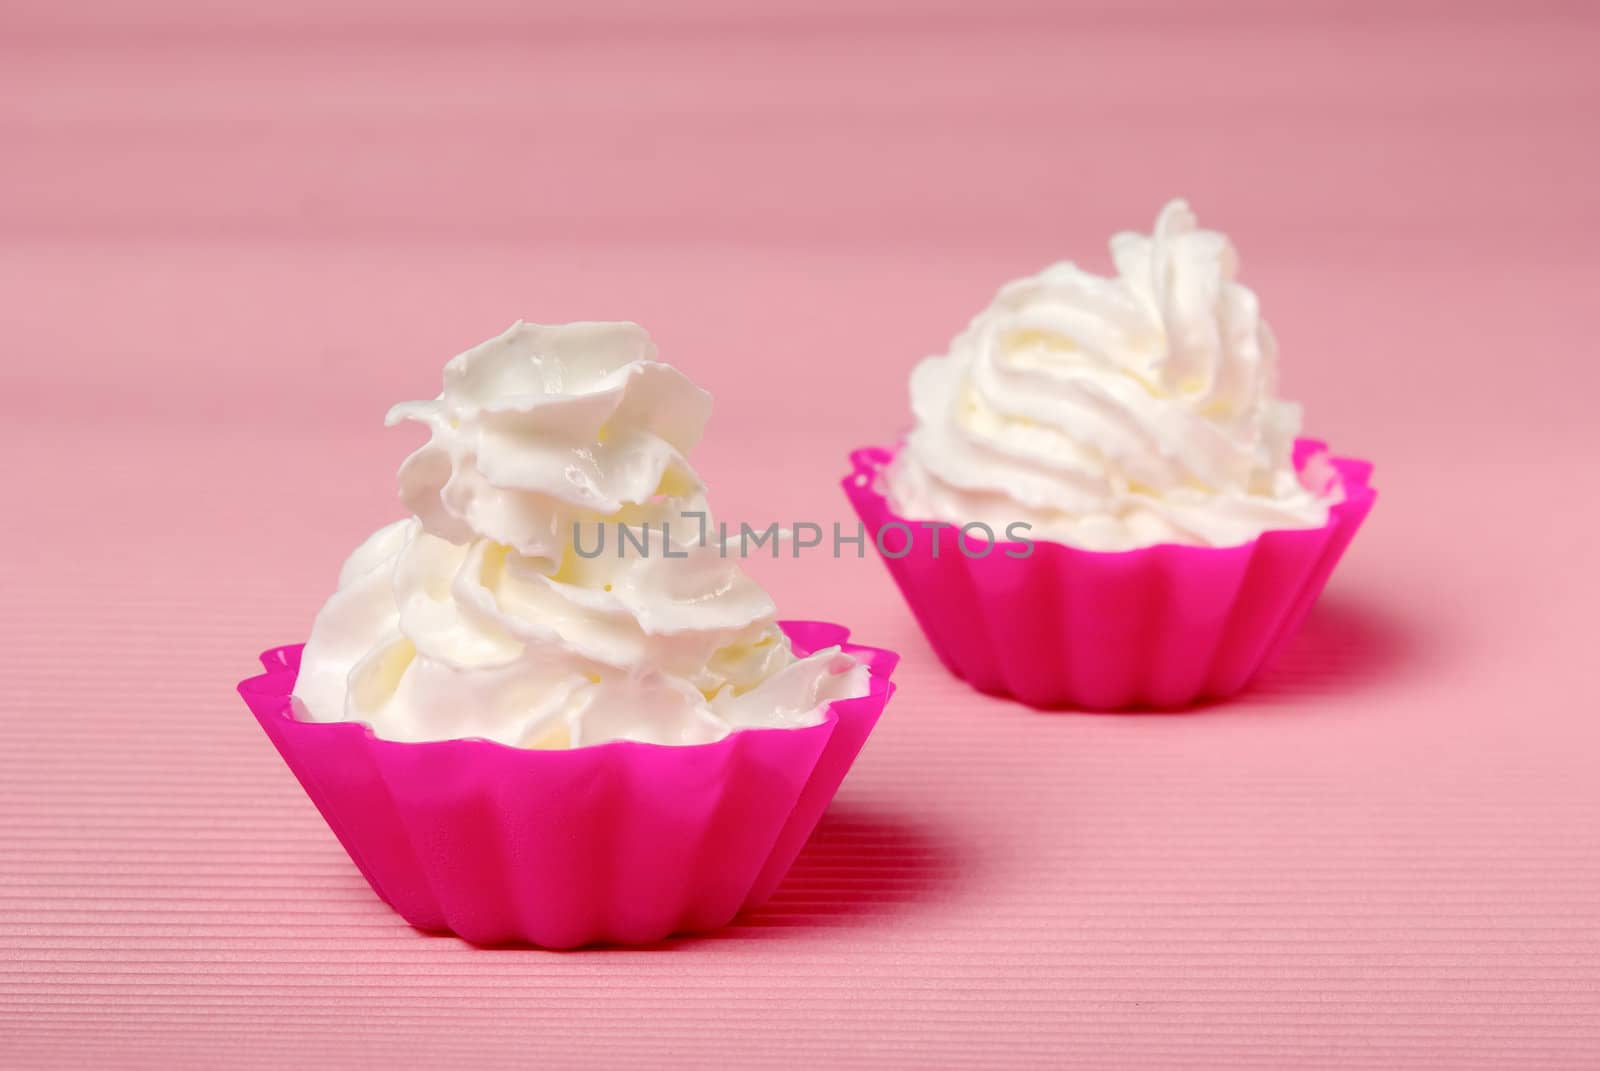 Two portions of whipped cream over pink background. Shallow DOF